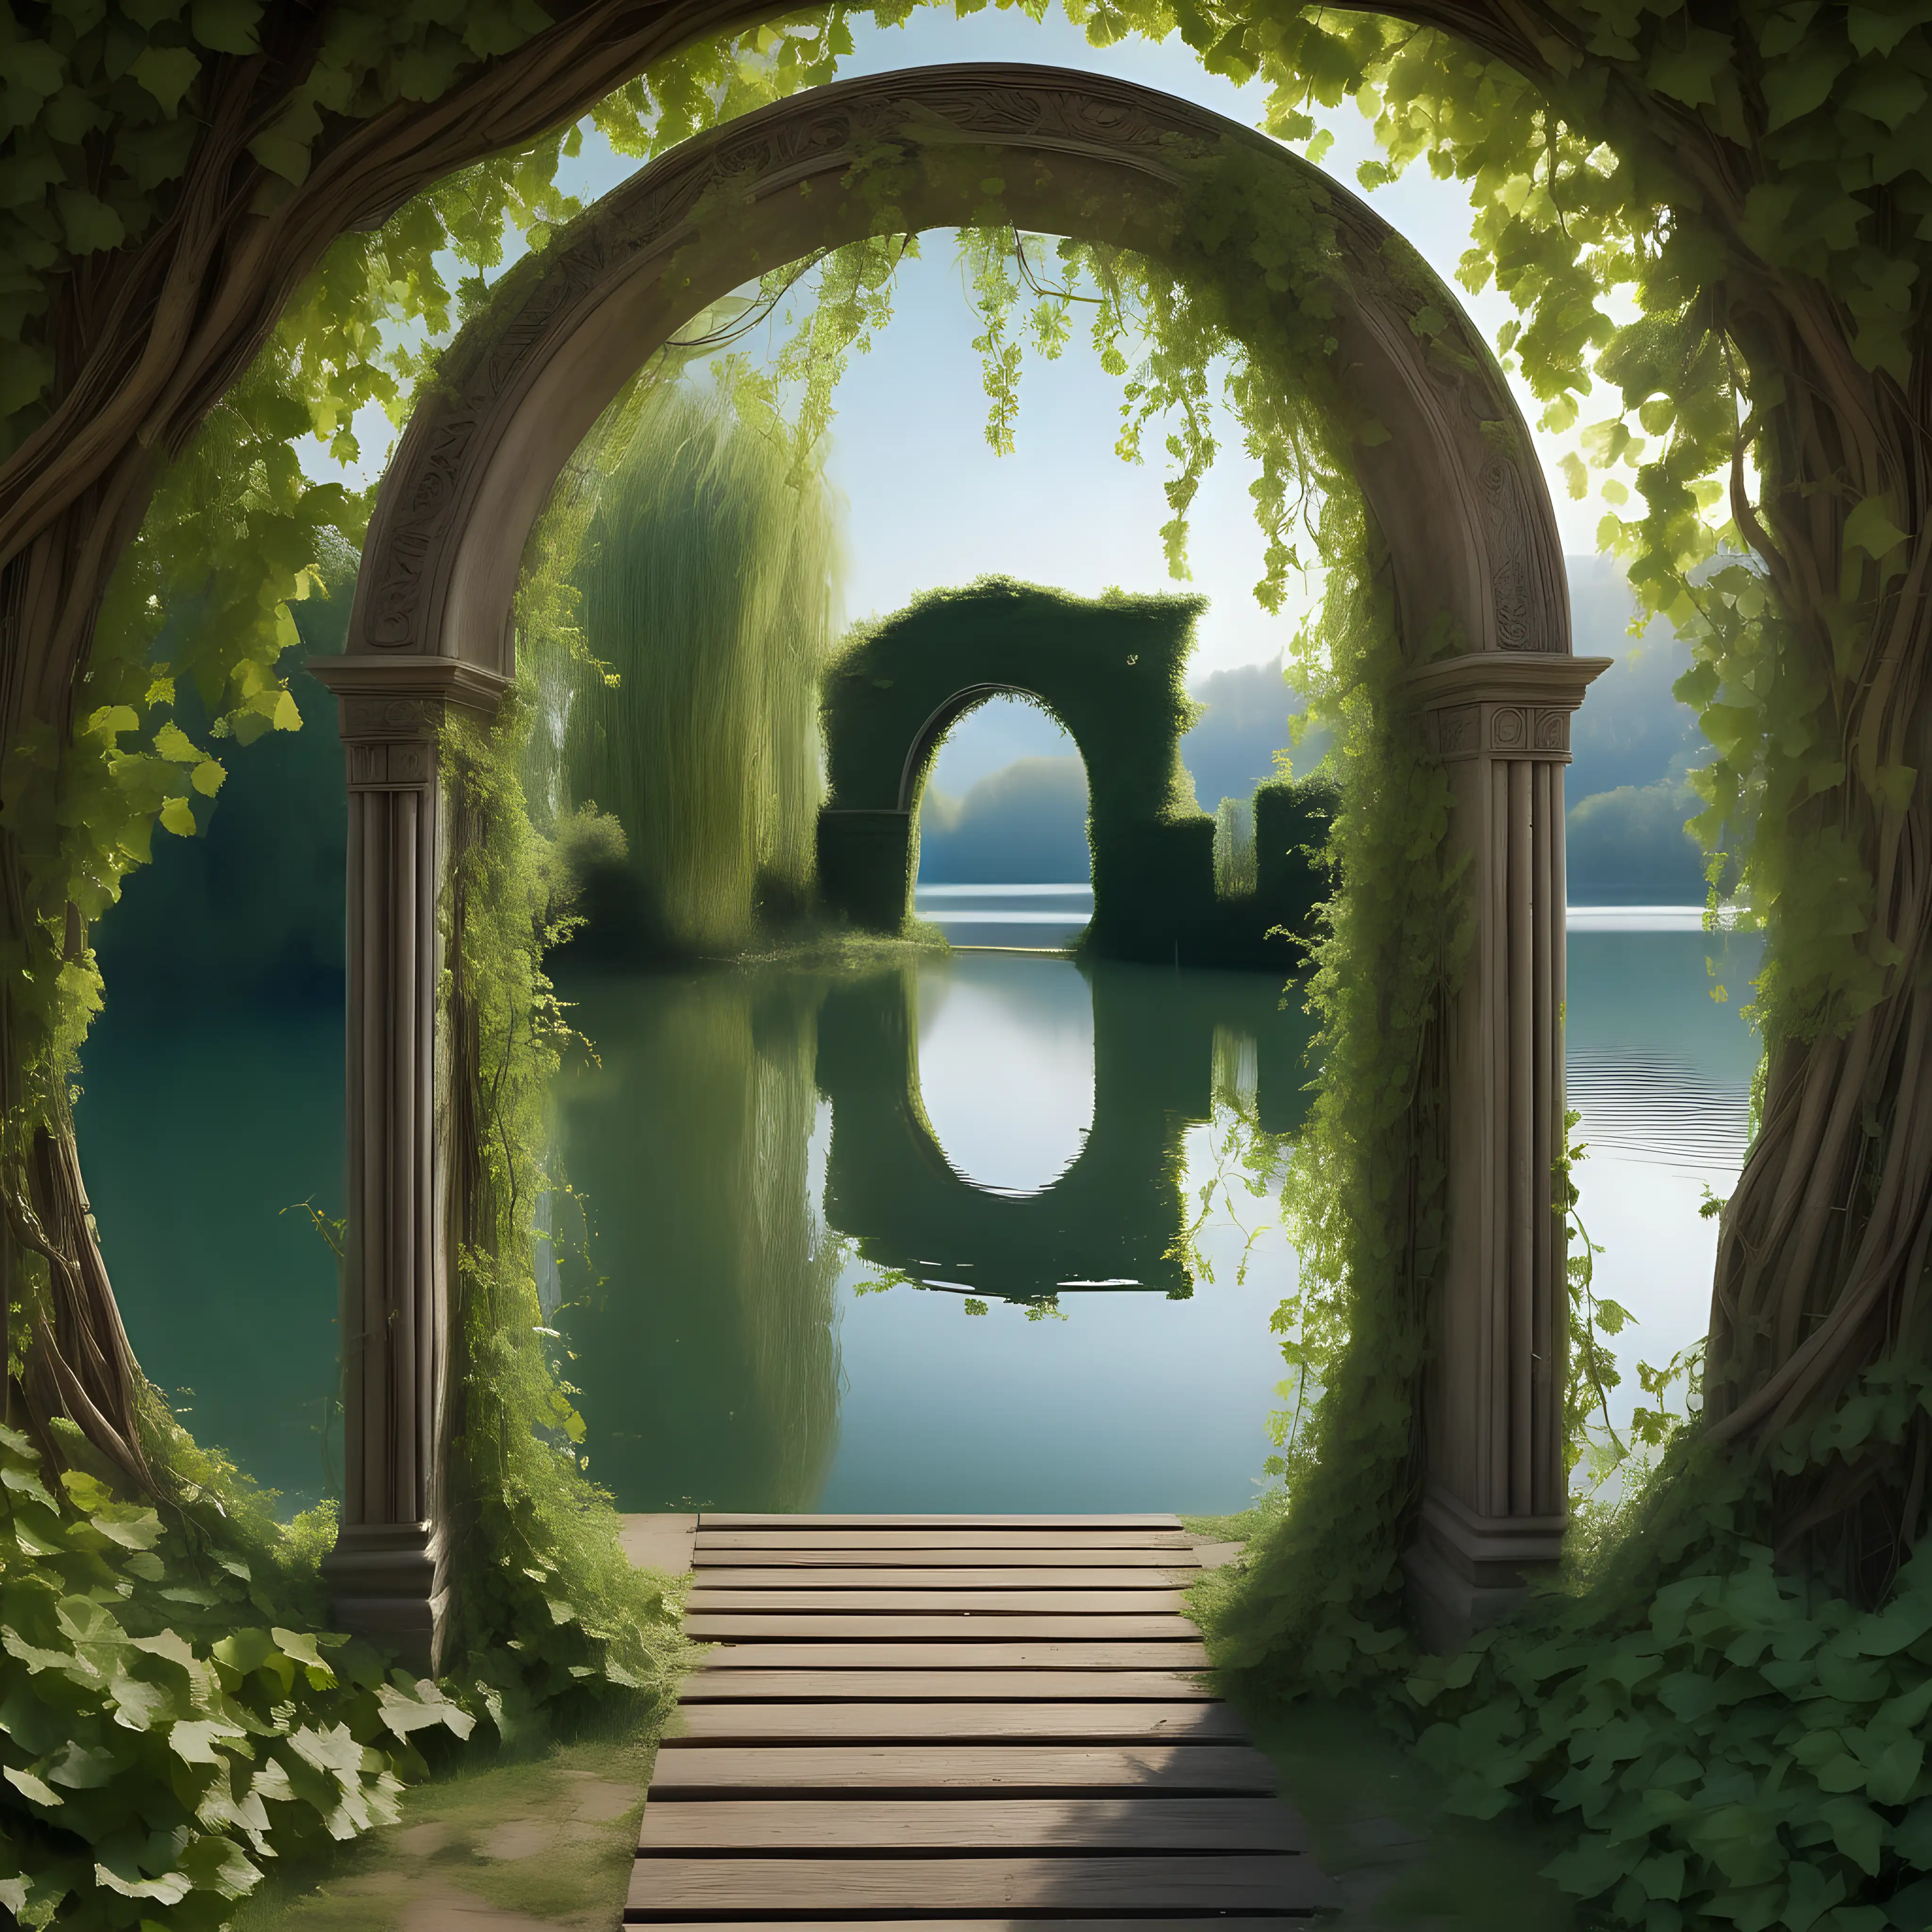 

a mystical place an ancient oval mirror  where a vine grows around the lake ,on the lake there is a pathway through an archway with ancient tall carved wooden arched doors that are half open  
